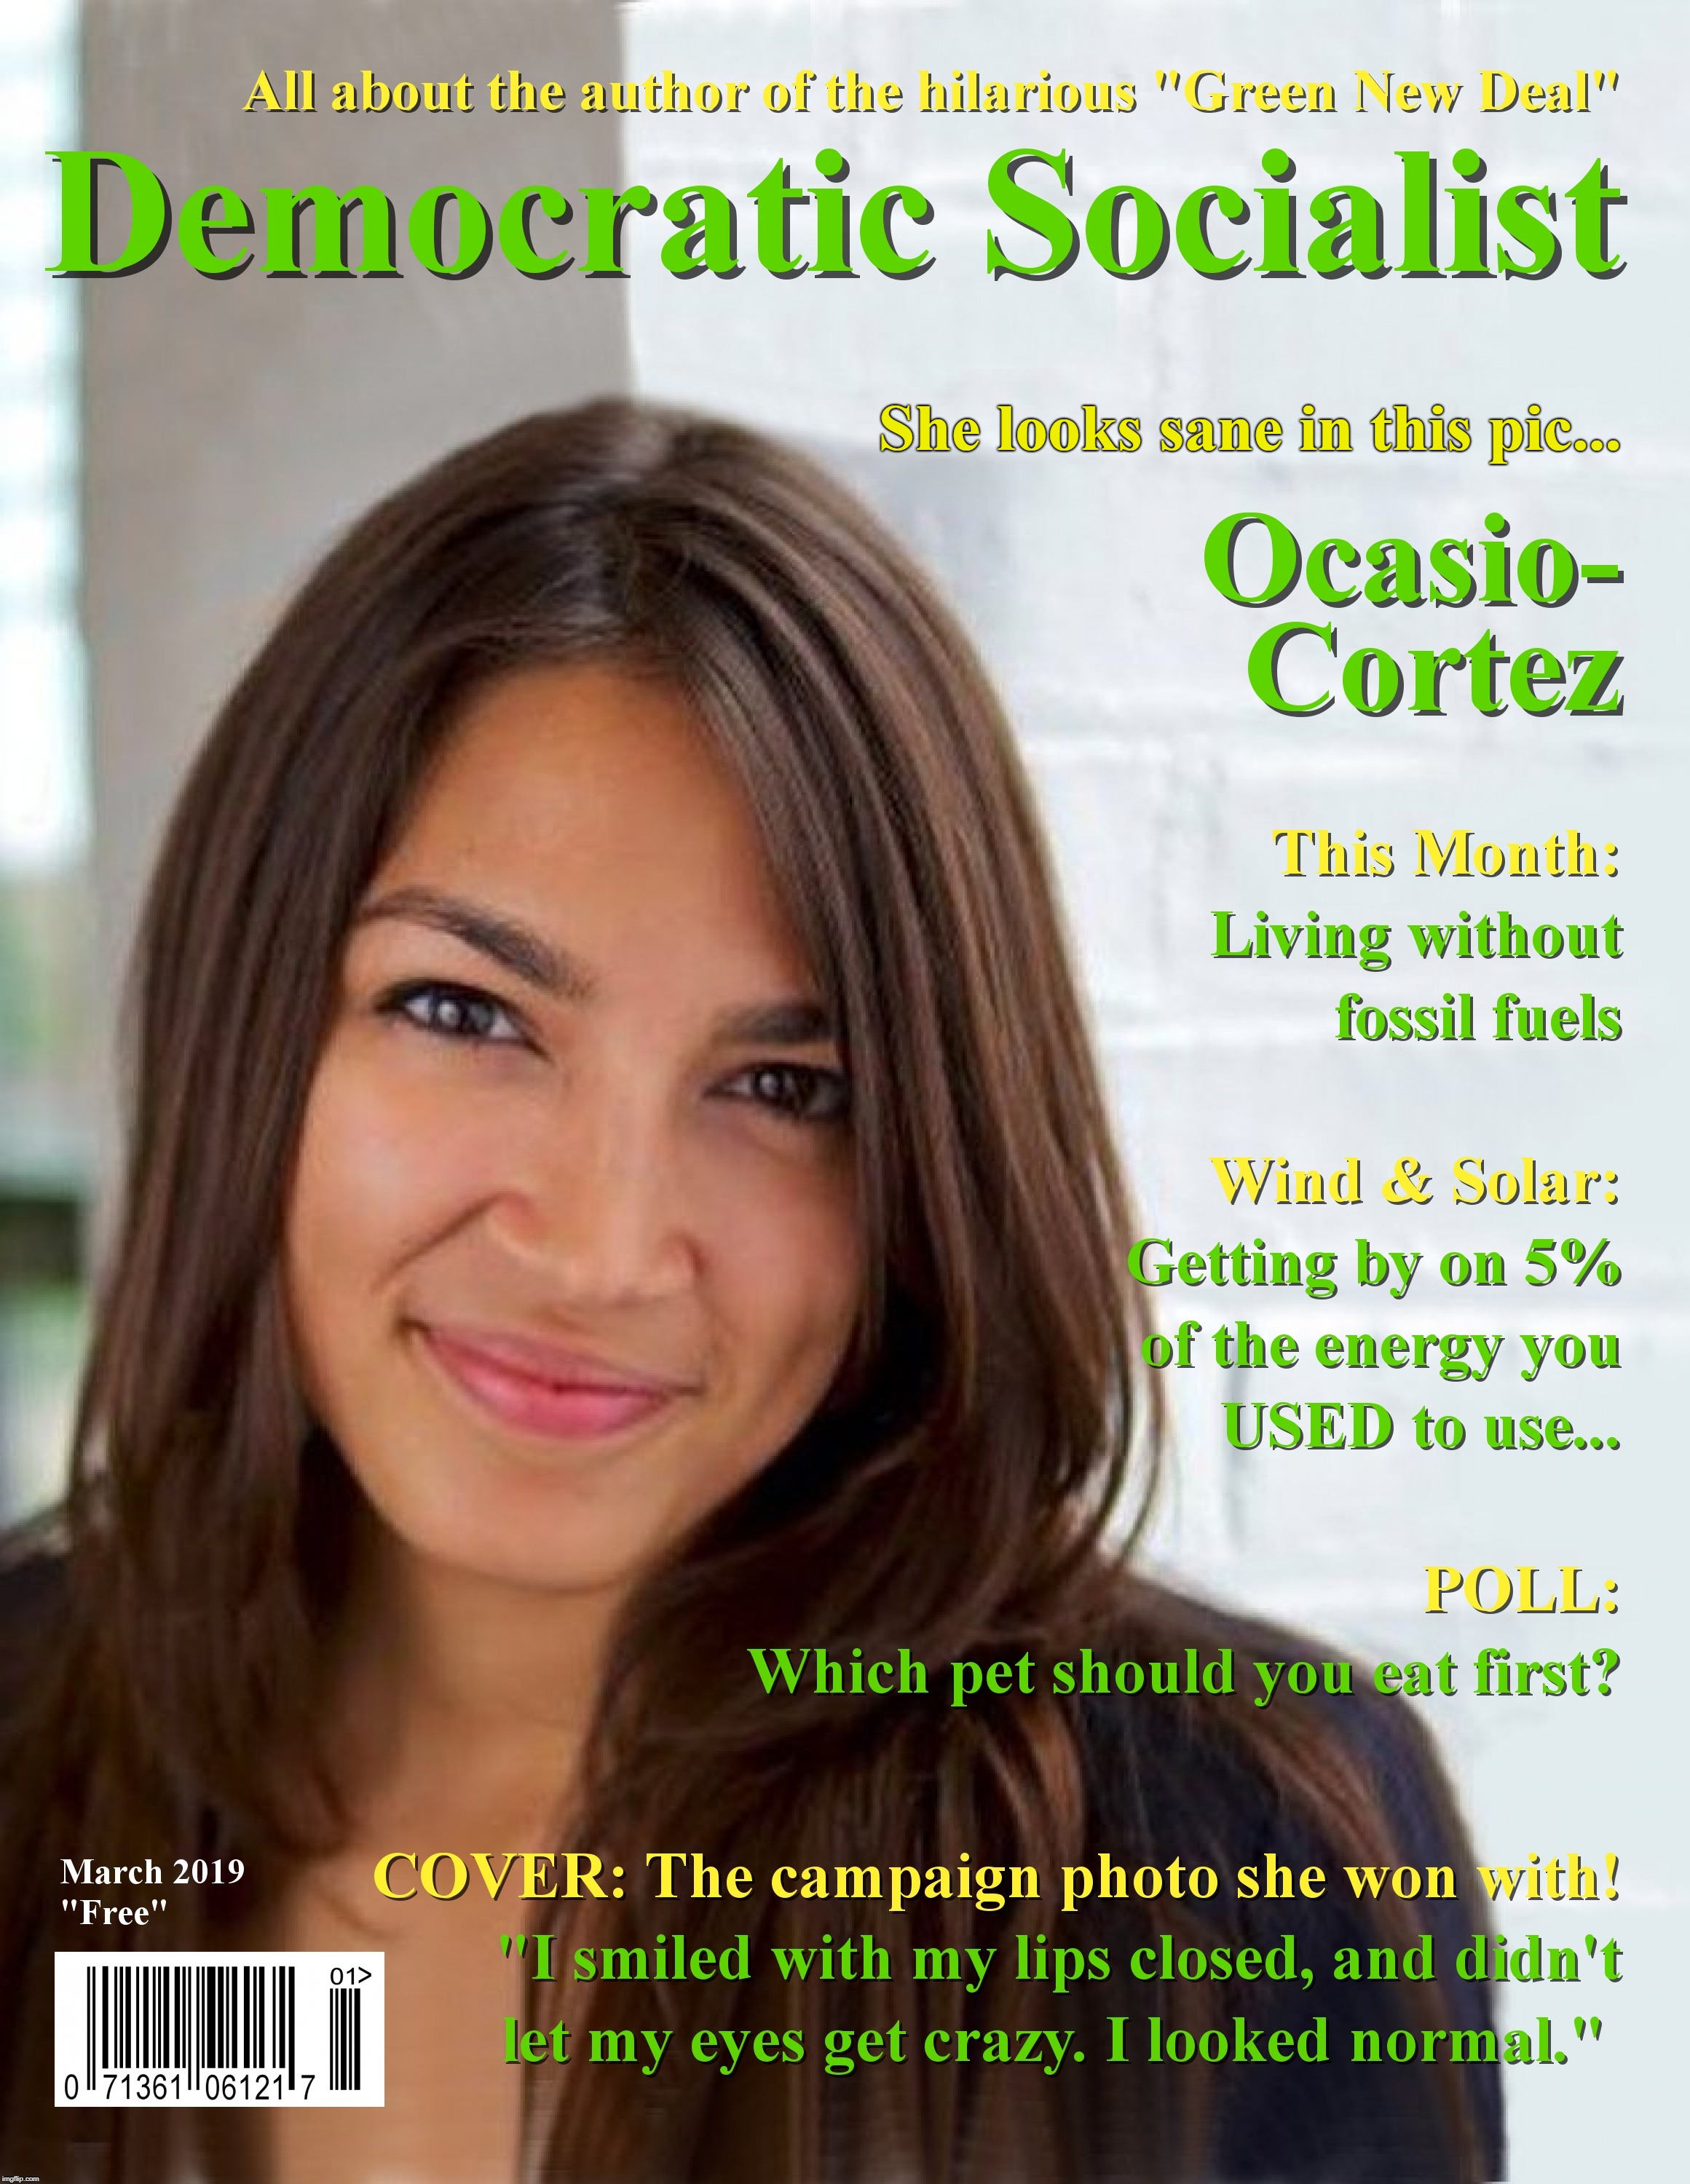 March issue | She looks sane in this pic... | image tagged in alexandria ocasio-cortez,ocasio-cortez,green new deal,democratic socialism | made w/ Imgflip meme maker